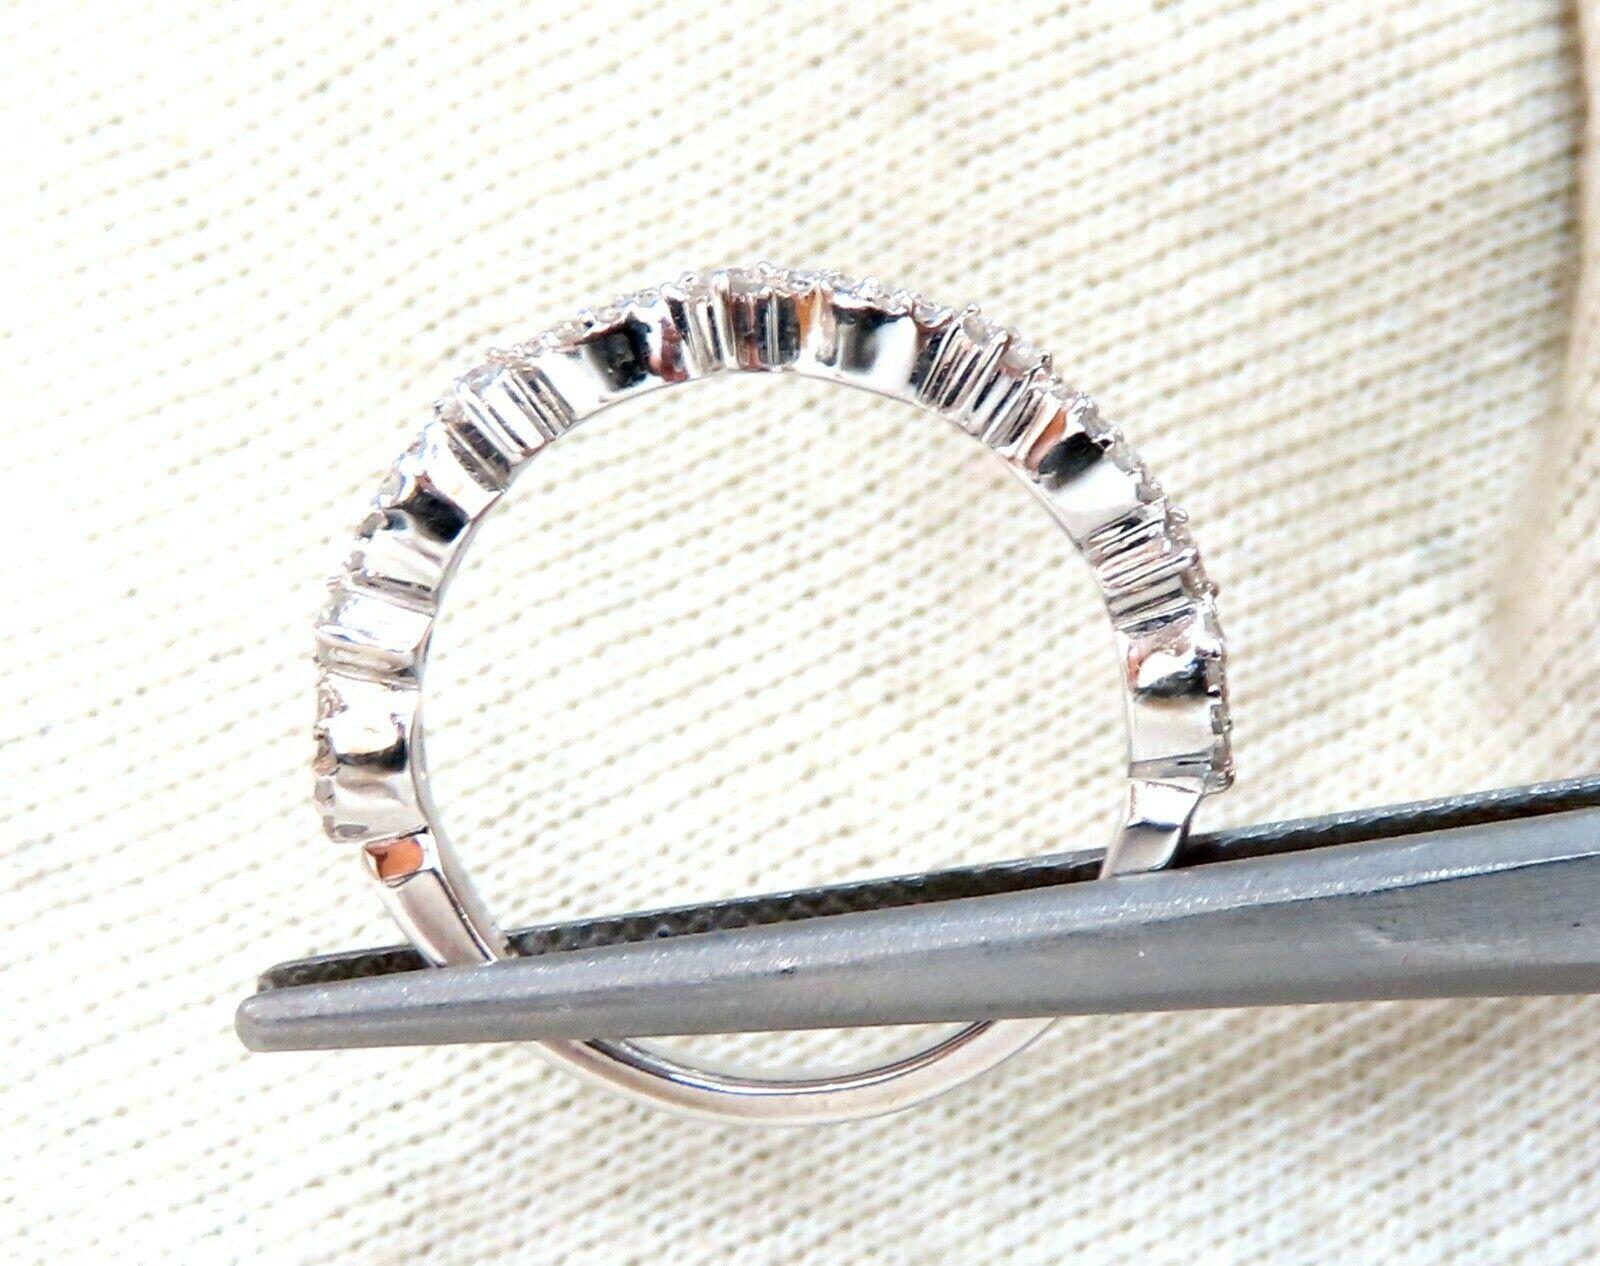 Thin Band, Flat profile.

.30ct Natural Diamonds

 Full cut, Rounds 

H color, clarity

14kt. white gold

6.2 Grams

2.5mm wide (top diamond rows)

3mm depth

current size: 7.25

We may resize (please inquire).